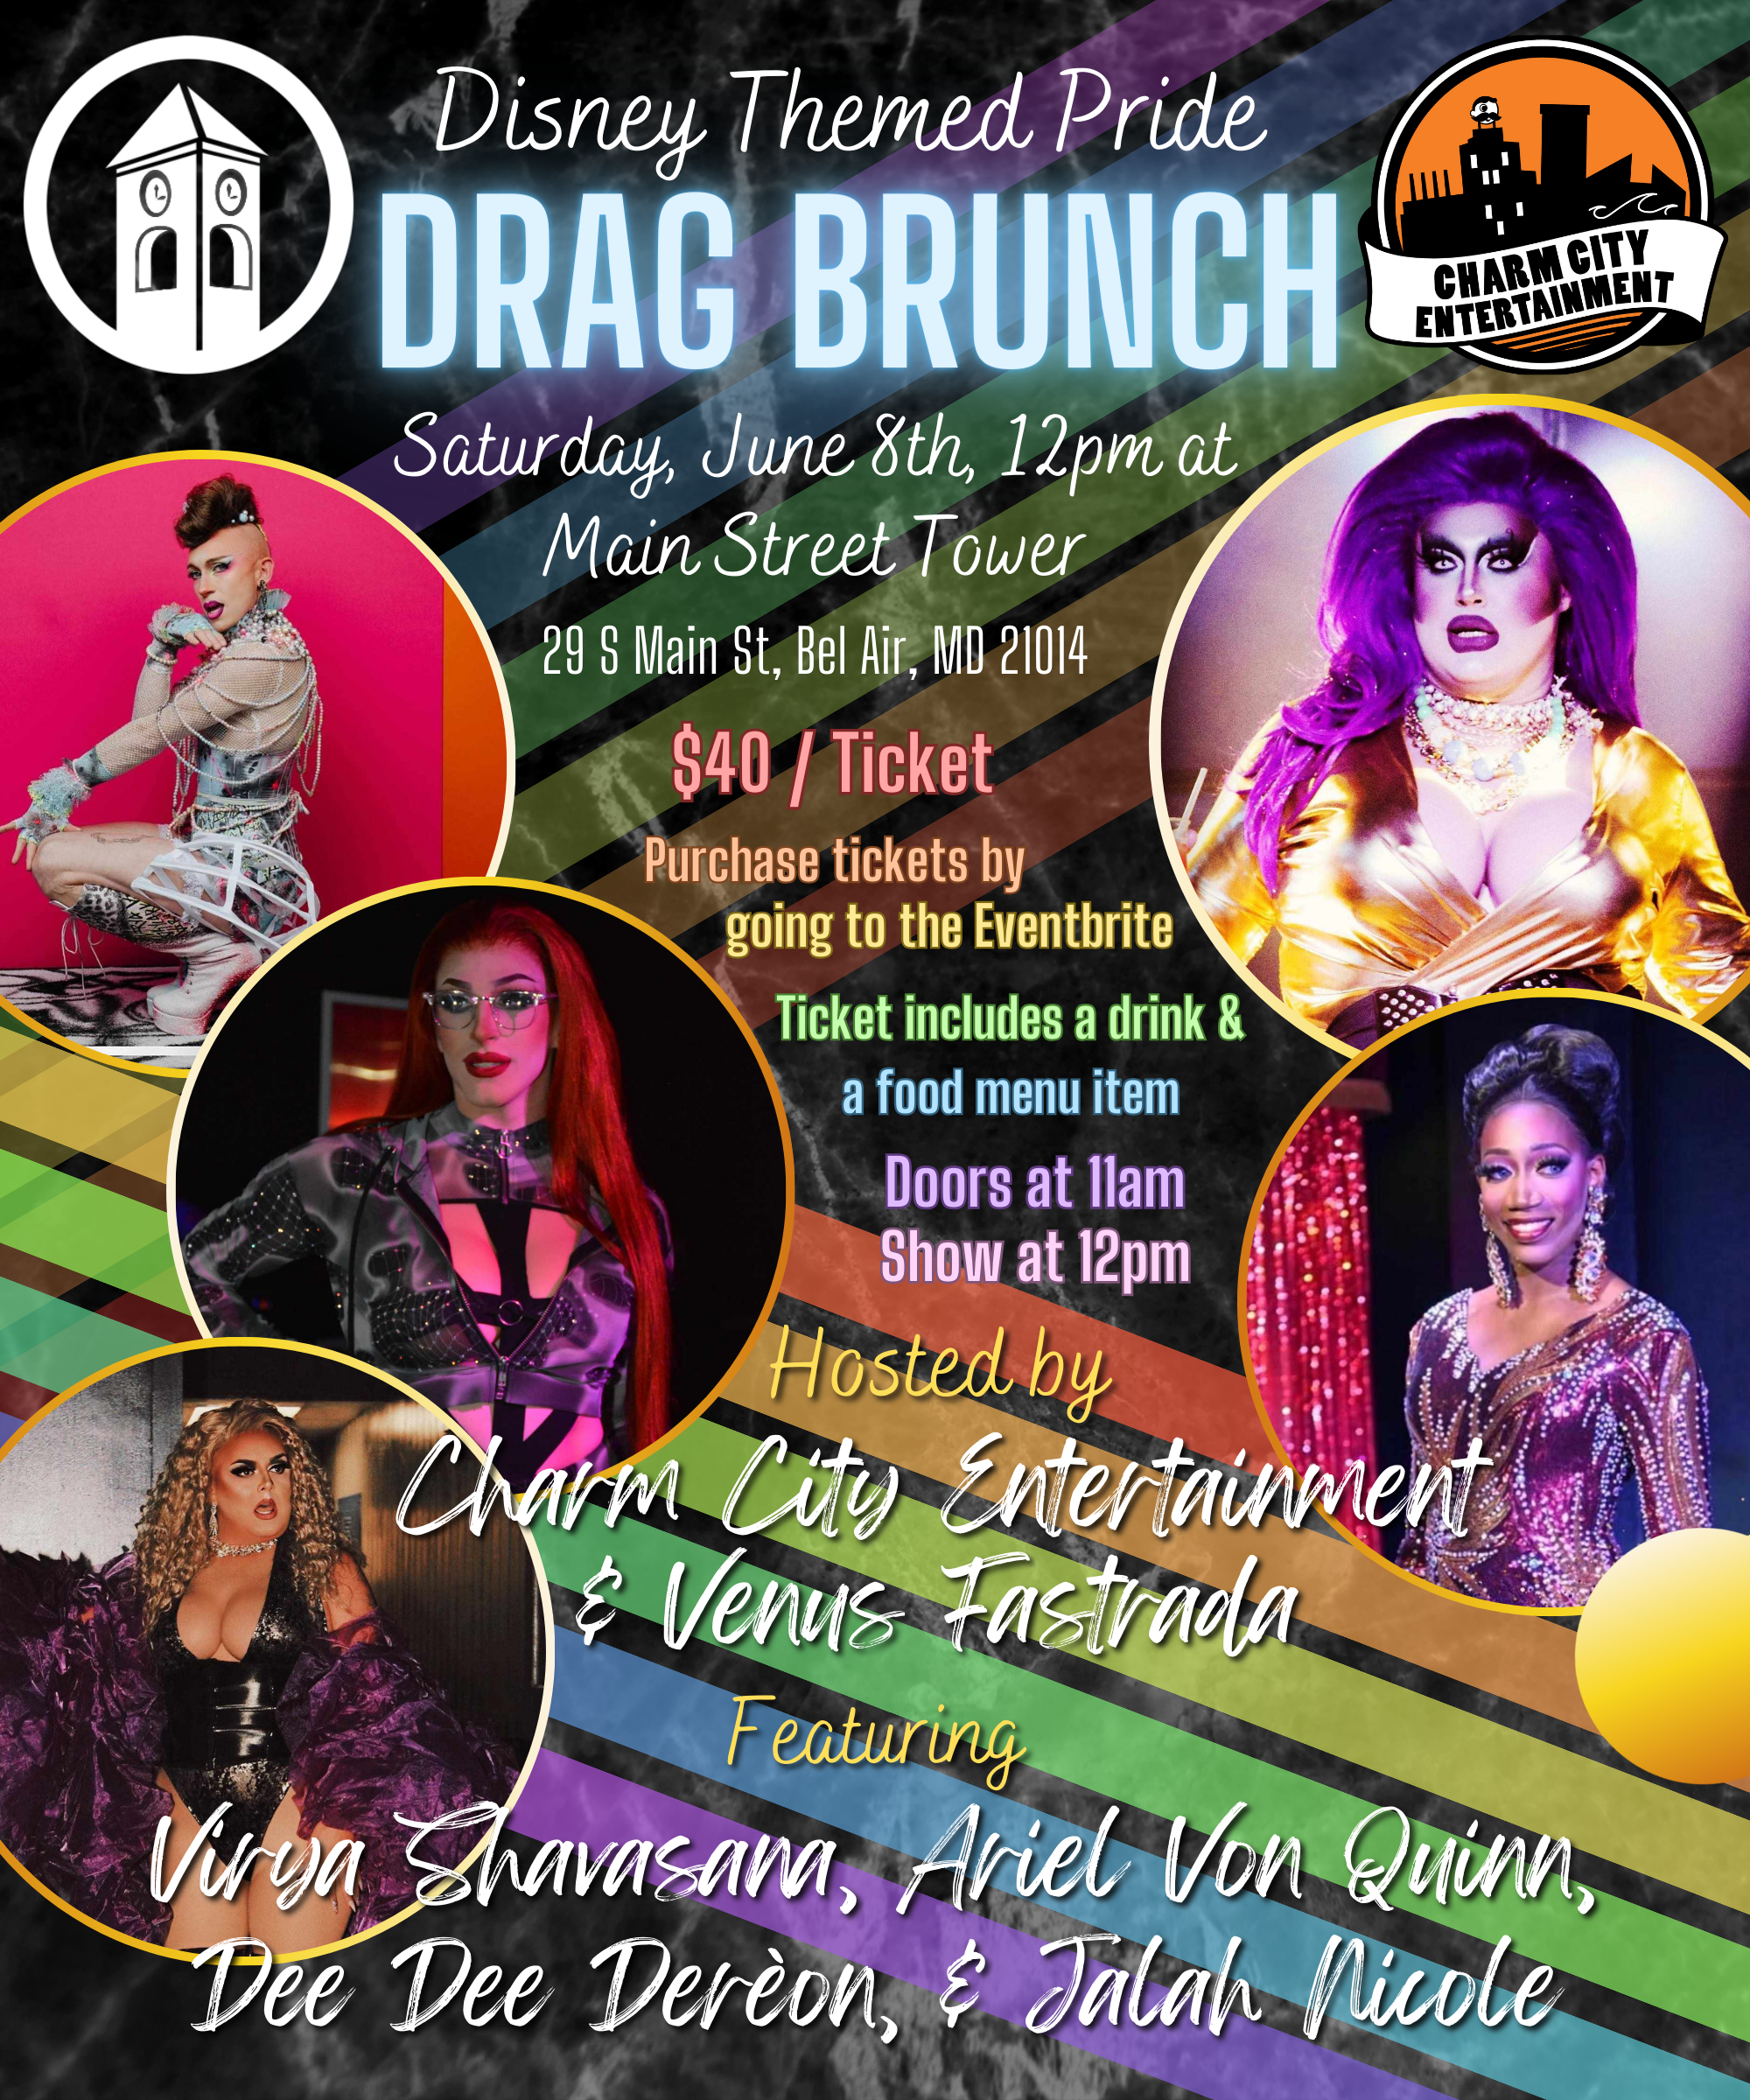 a black background with a marble texture, a rainbow zigzag, the Charm City Entertainment logo, the Main Street Tower logo, photos of the four Queens, and light blue, white, and pastel rainbow text. The text reads: Drag Brunch. Saturday, June 8th, 12pm at Main Street Tower. 29 S Main St, Bel Air, MD, 21014. Purchase tickets by going to the Eventbrite. Ticket includes a drink & a food menu item. Doors at 11am. Show at 12pm. Hosted by Charm City Entertainment & Venus Fastrada. Featuring Virya Shavasana, Ariel Von Quinn, Dee Dee Derèon, & Jalah Nicole.